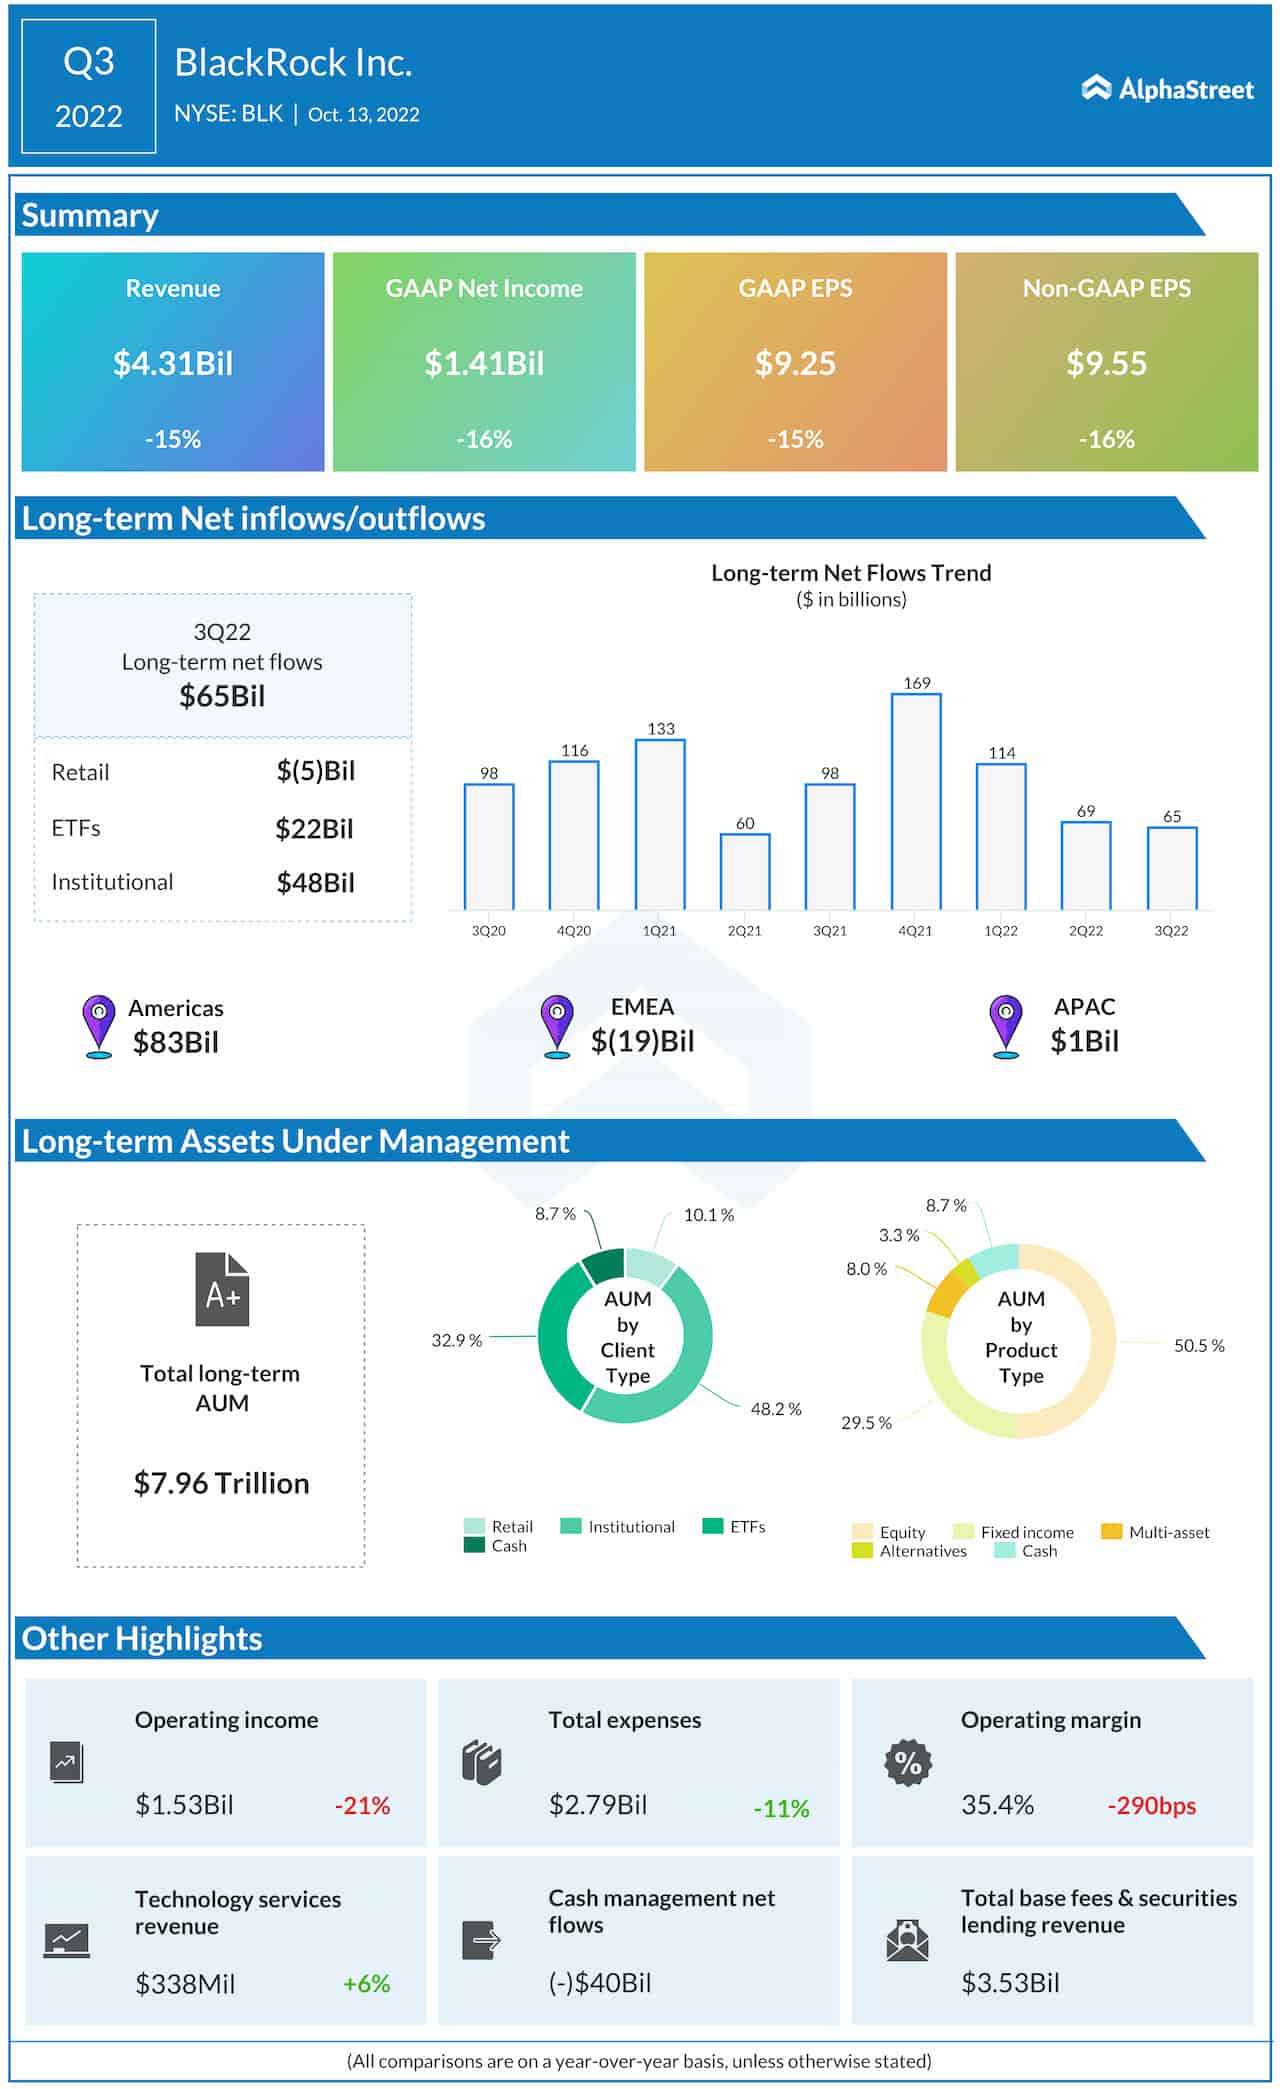 Infographic: Highlights BlackRock’s Q3 2022 earnings report